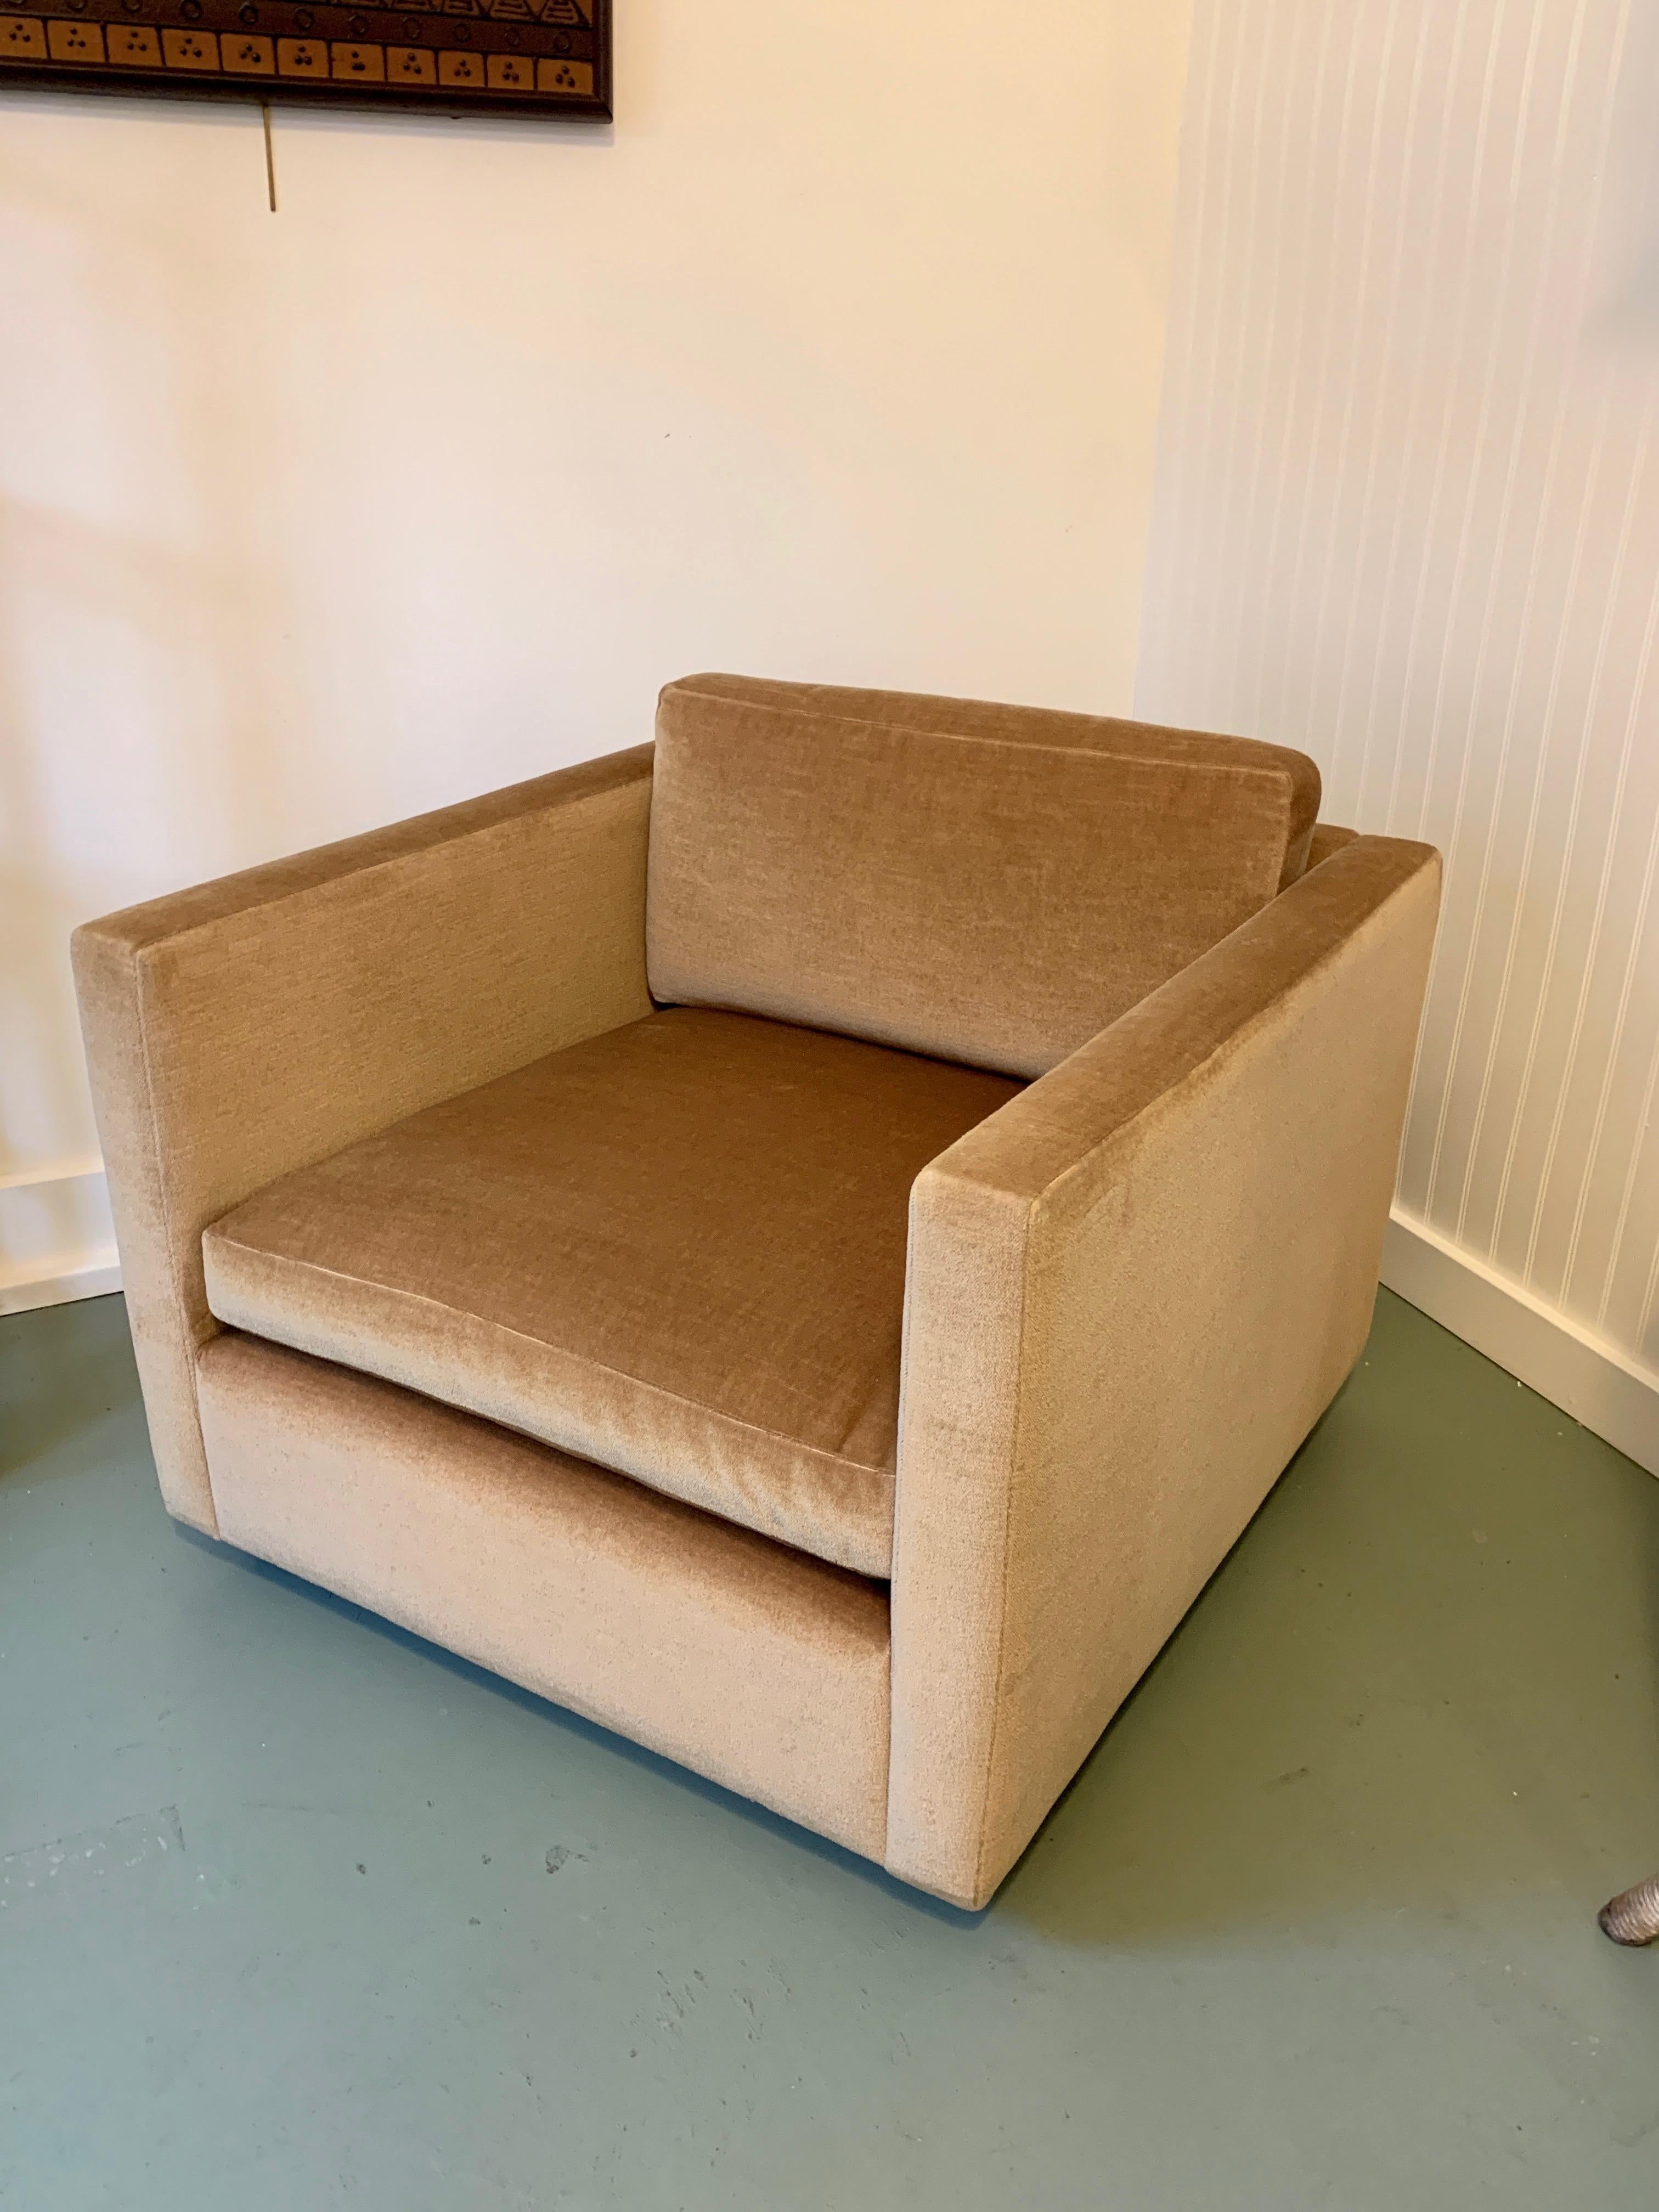 Cube lounge chair designed by Charles Pfister for Knoll.
Supported by tubular square legs.
Upholstered in caramel mohair fabric.
V shape tear on underside black fabric probably to see structure of chair.
Upholstery fabric in very good condition.